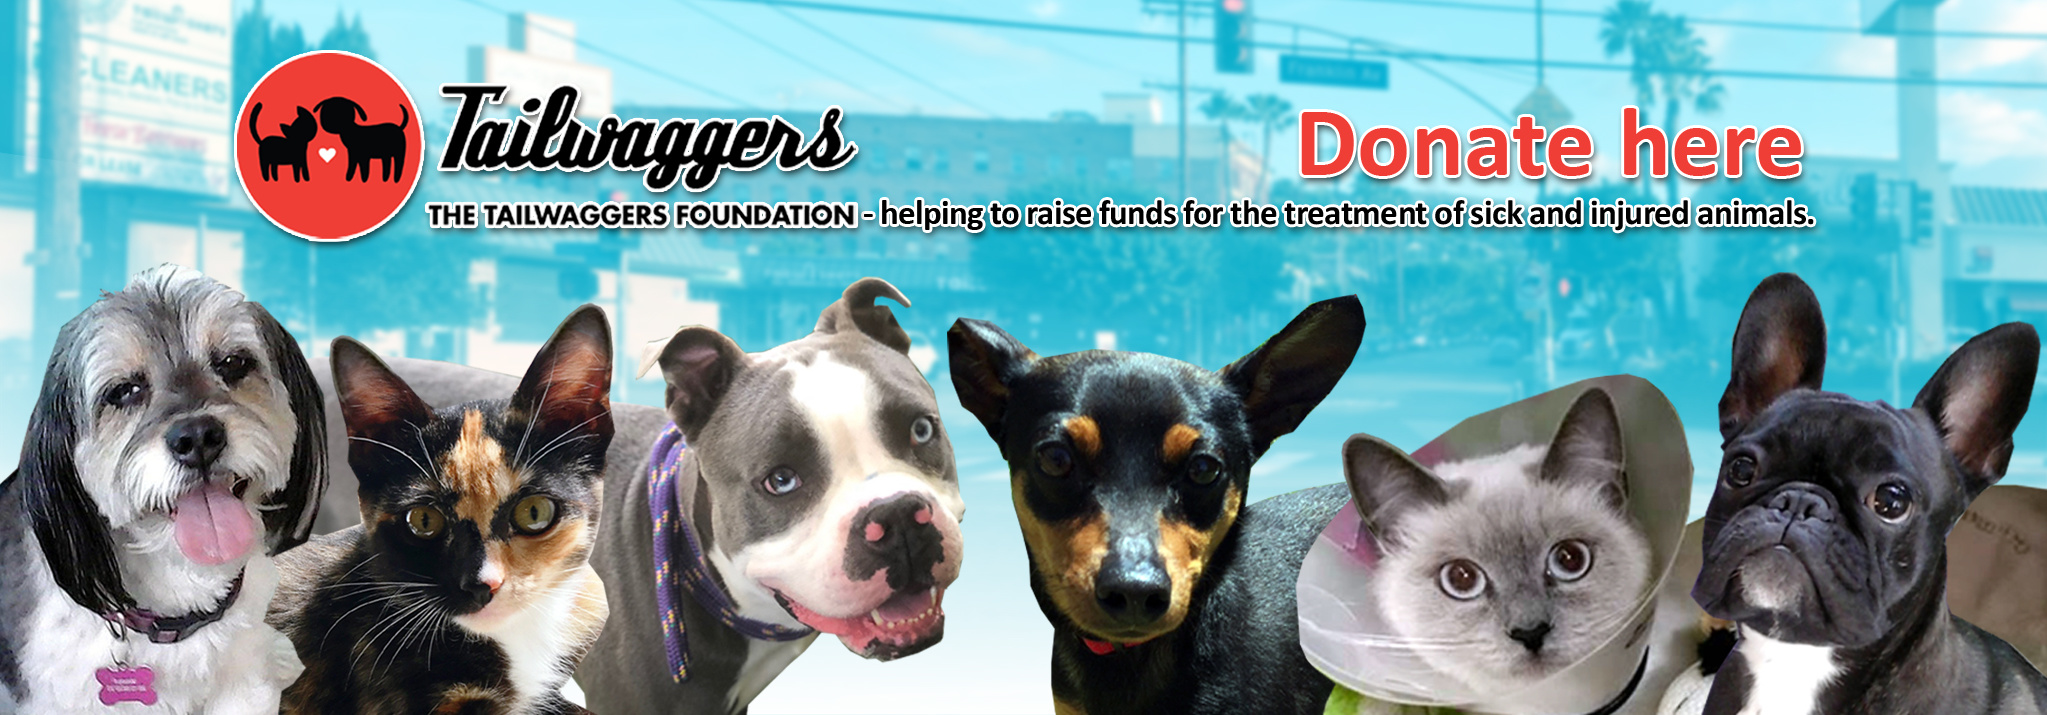 The Tailwaggers Foundation